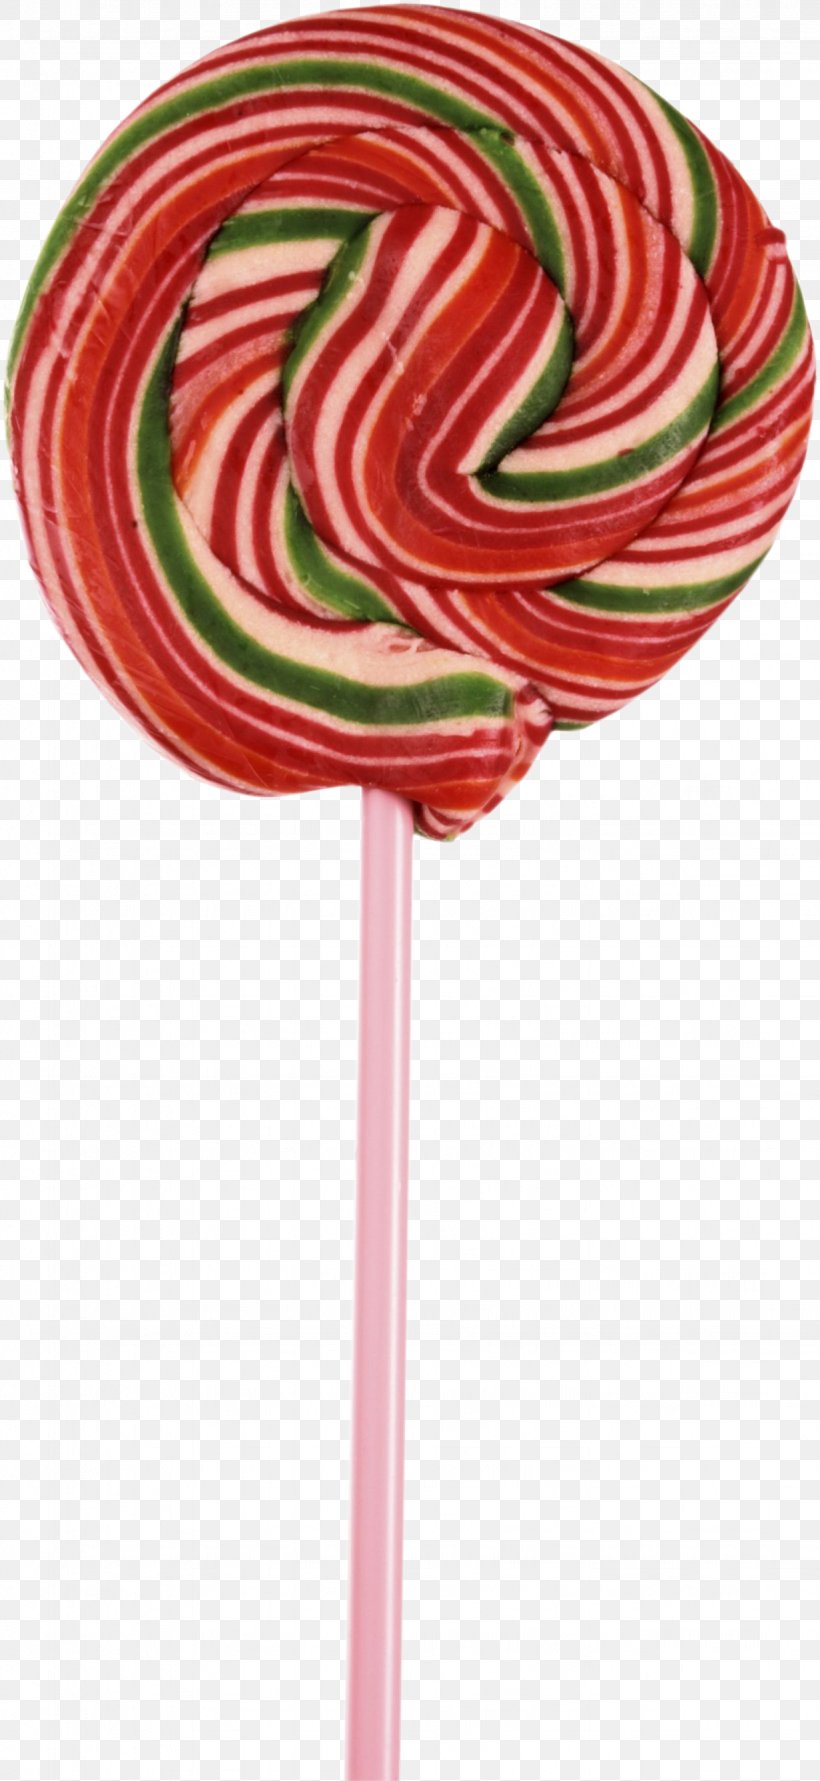 Lollipop Candy Clip Art, PNG, 1231x2675px, Lollipop, Candy, Caramel, Chupa Chups, Confectionery Download Free